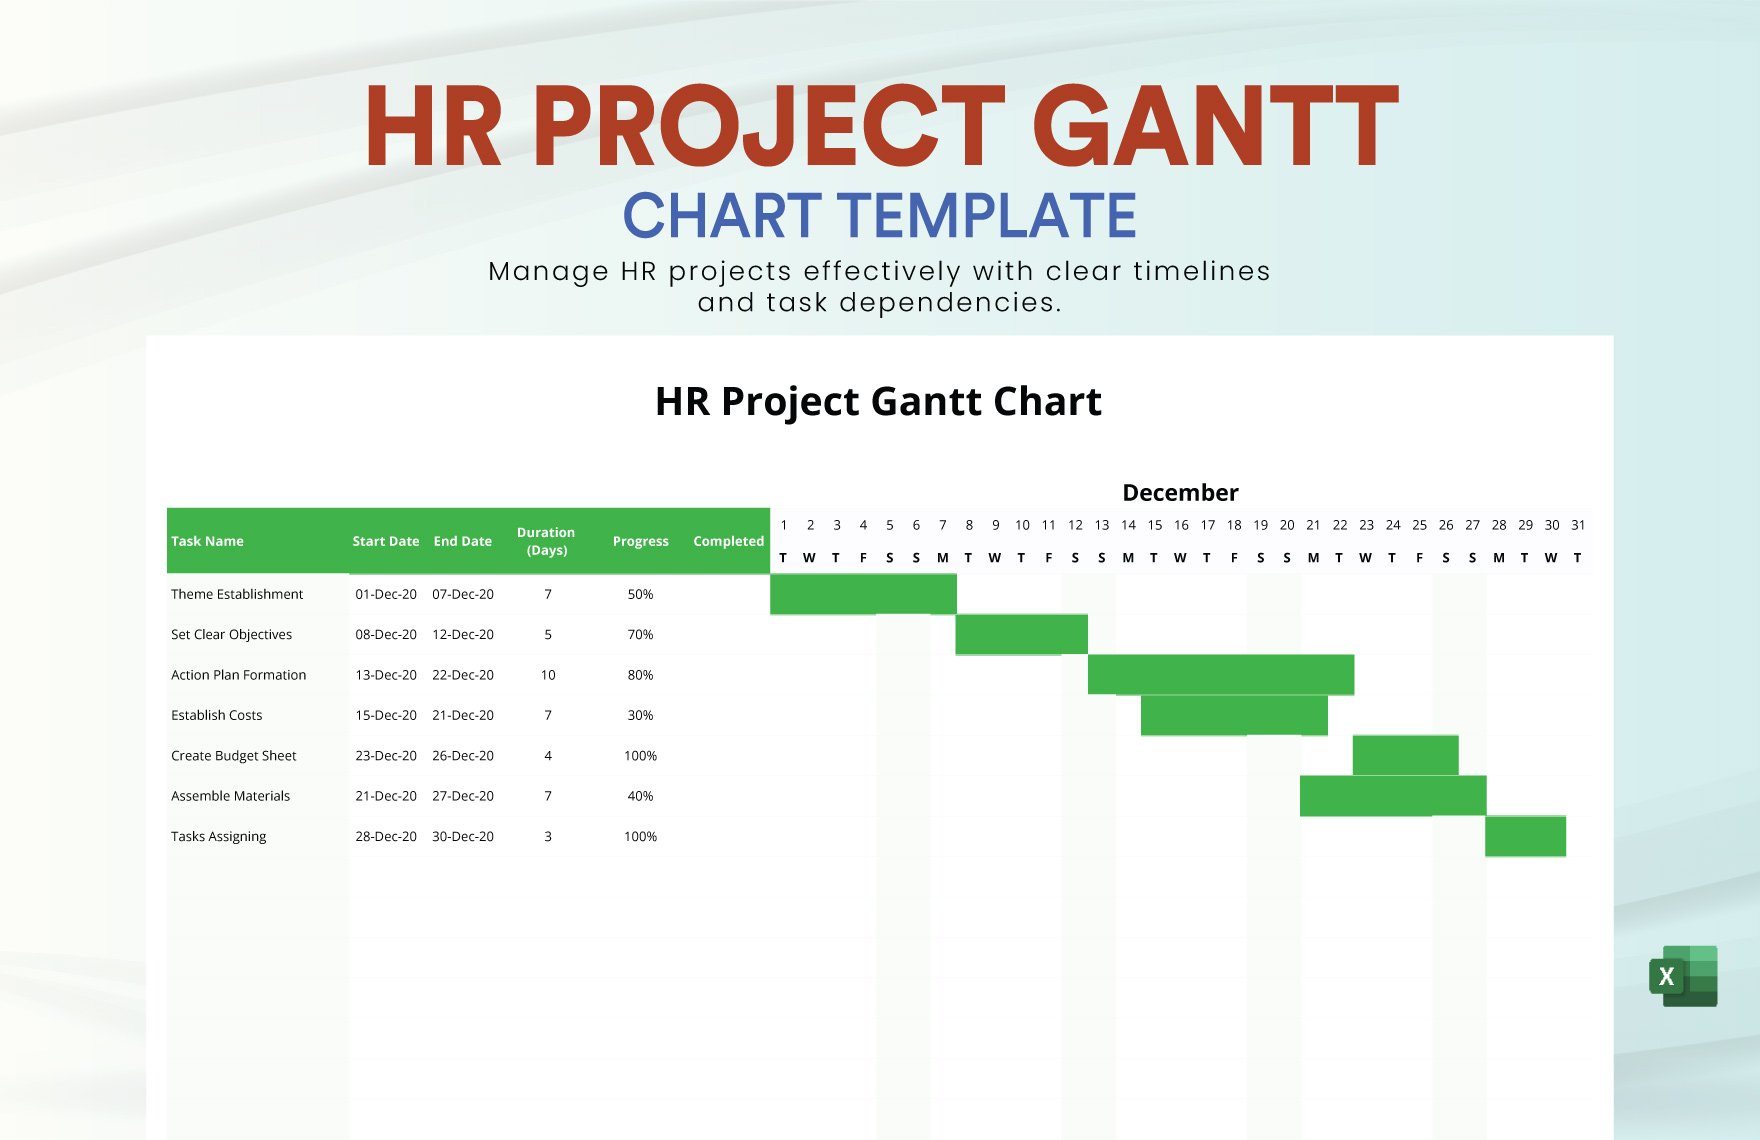 HR Project Gantt Chart Template in Excel